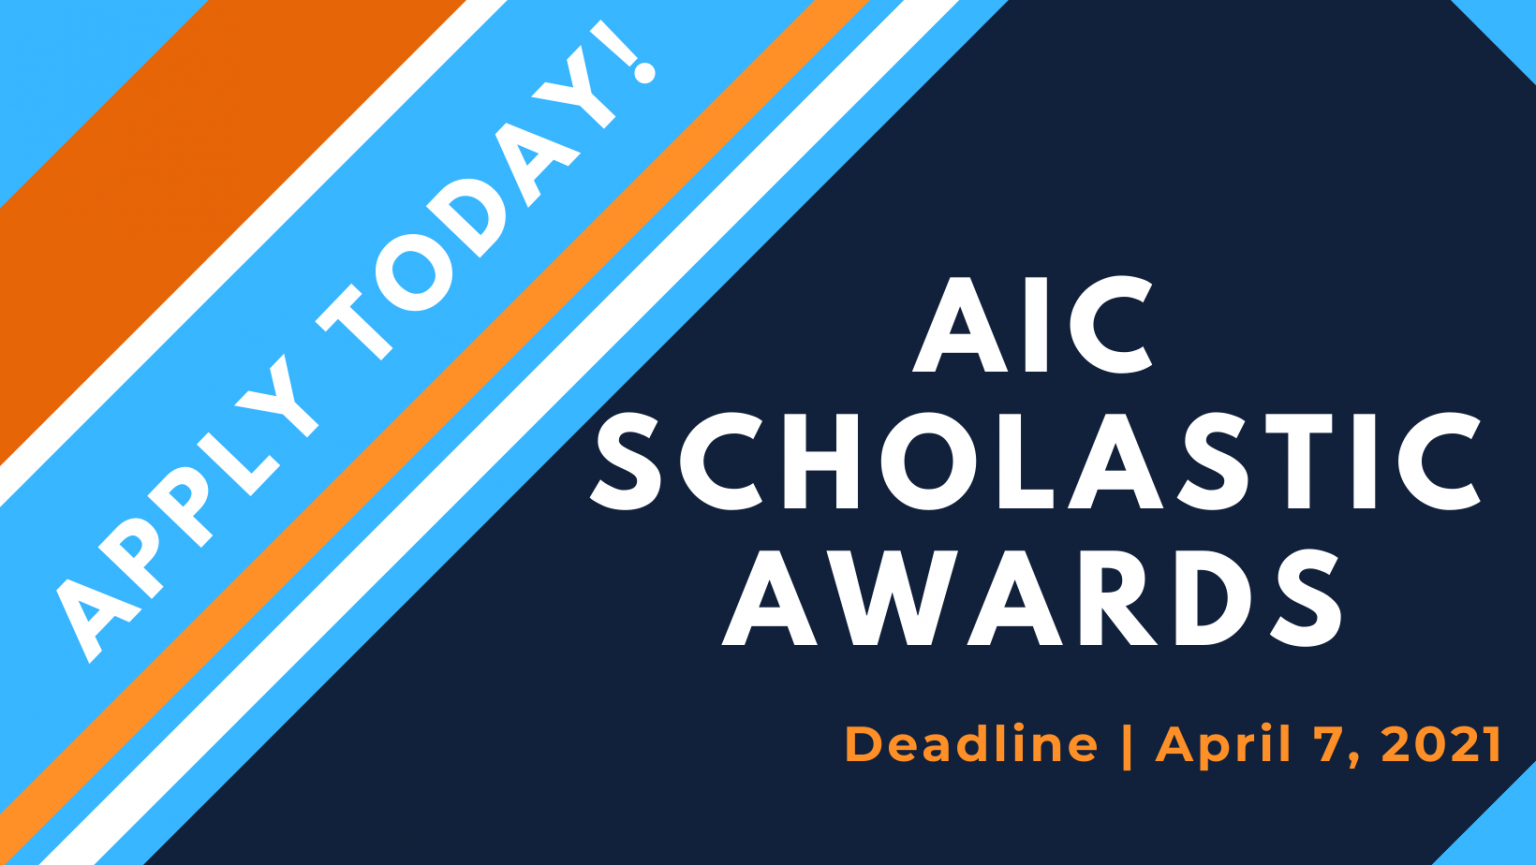 American Indian Center 20202021 AIC Scholastic Award Opportunities are